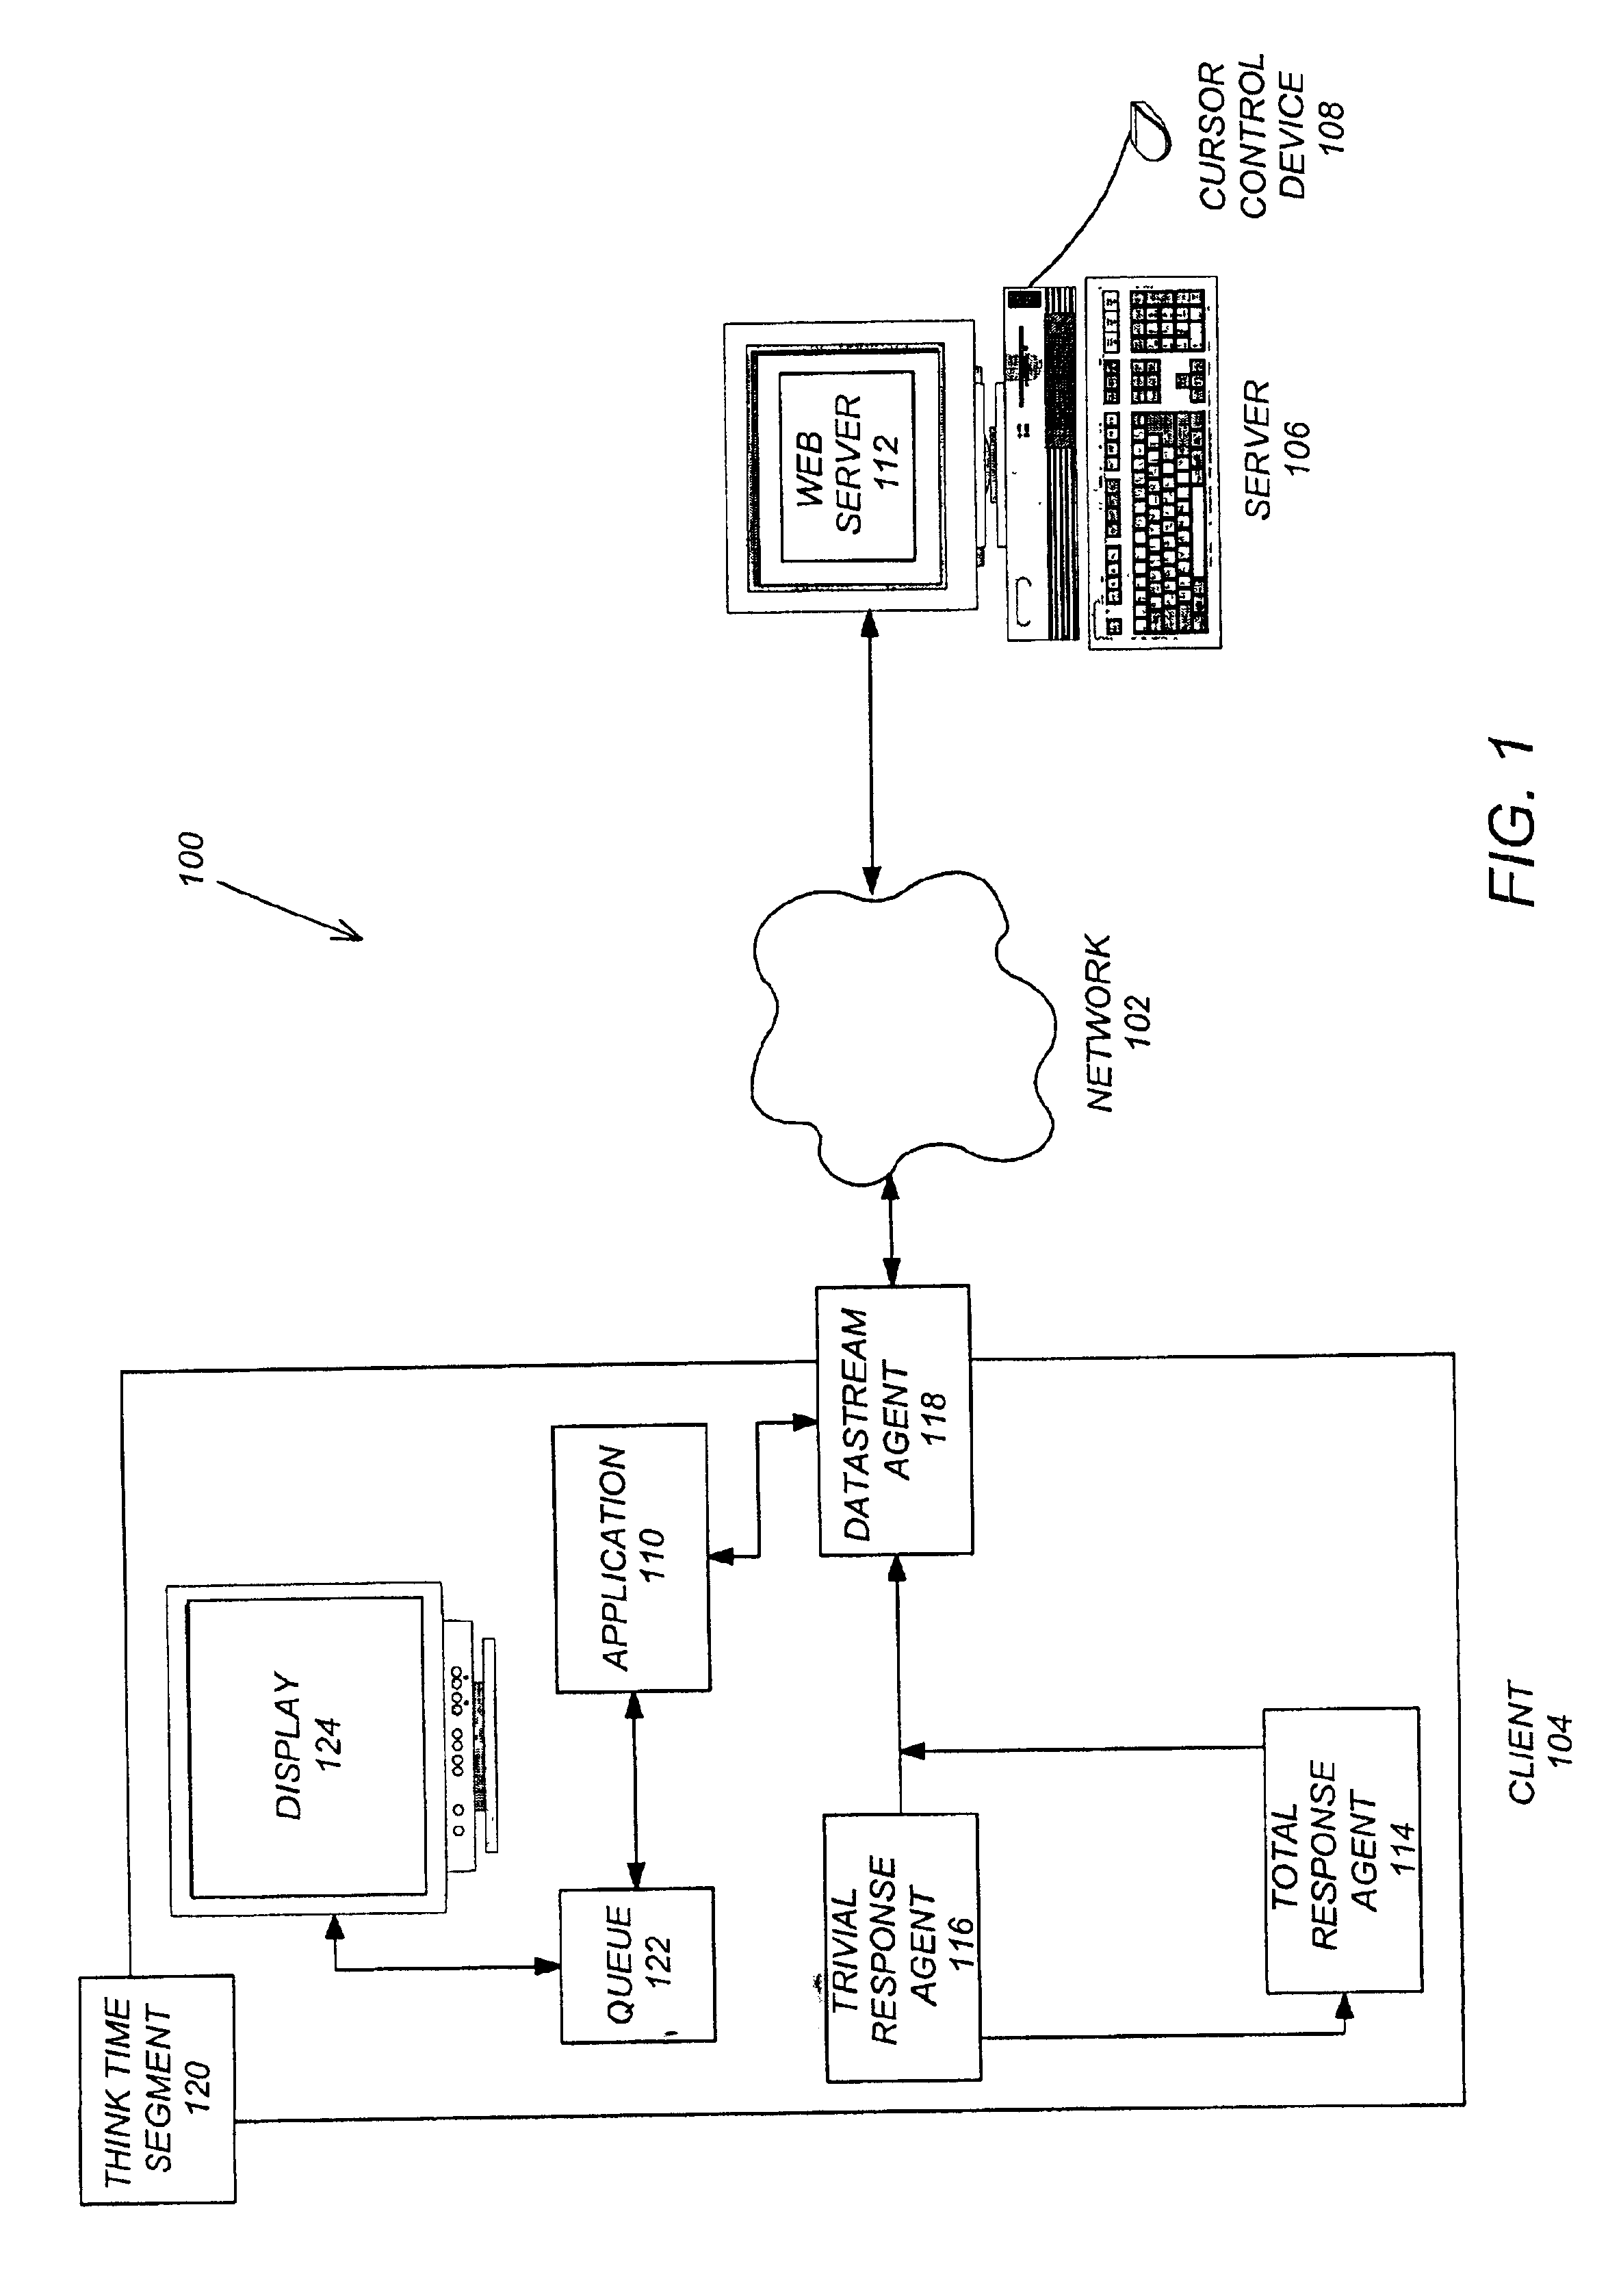 Method and apparatus for determining a response time for a segment in a client/server computing environment